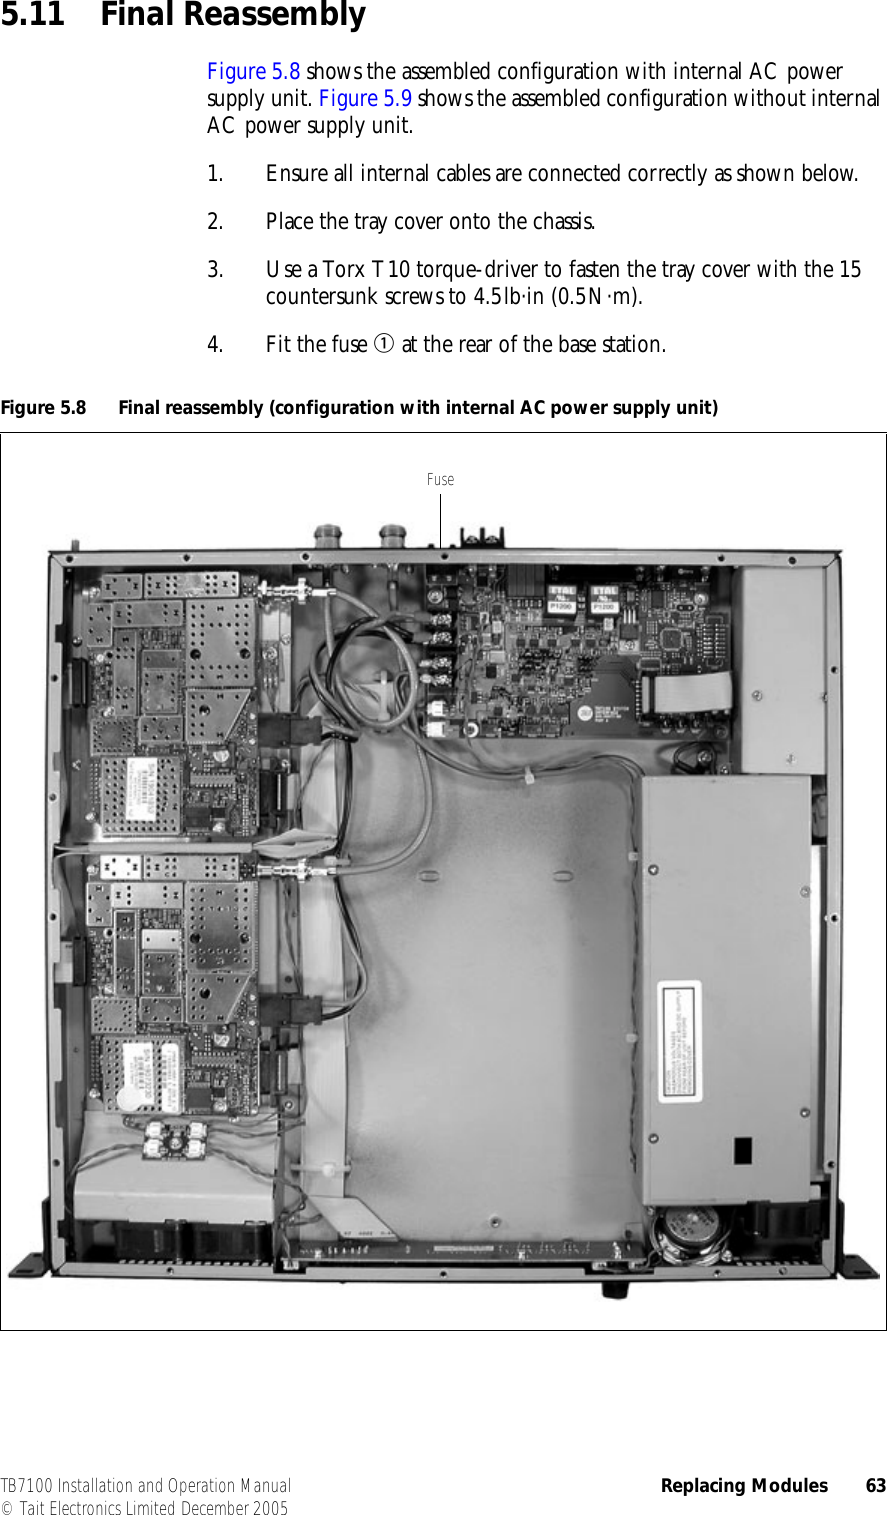  TB7100 Installation and Operation Manual Replacing Modules 63© Tait Electronics Limited December 20055.11 Final ReassemblyFigure 5.8 shows the assembled configuration with internal AC power supply unit. Figure 5.9 shows the assembled configuration without internal AC power supply unit.1. Ensure all internal cables are connected correctly as shown below.2. Place the tray cover onto the chassis.3. Use a Torx T10 torque-driver to fasten the tray cover with the 15 countersunk screws to 4.5lb·in (0.5N·m).4. Fit the fuse b at the rear of the base station.Figure 5.8 Final reassembly (configuration with internal AC power supply unit)Fuse